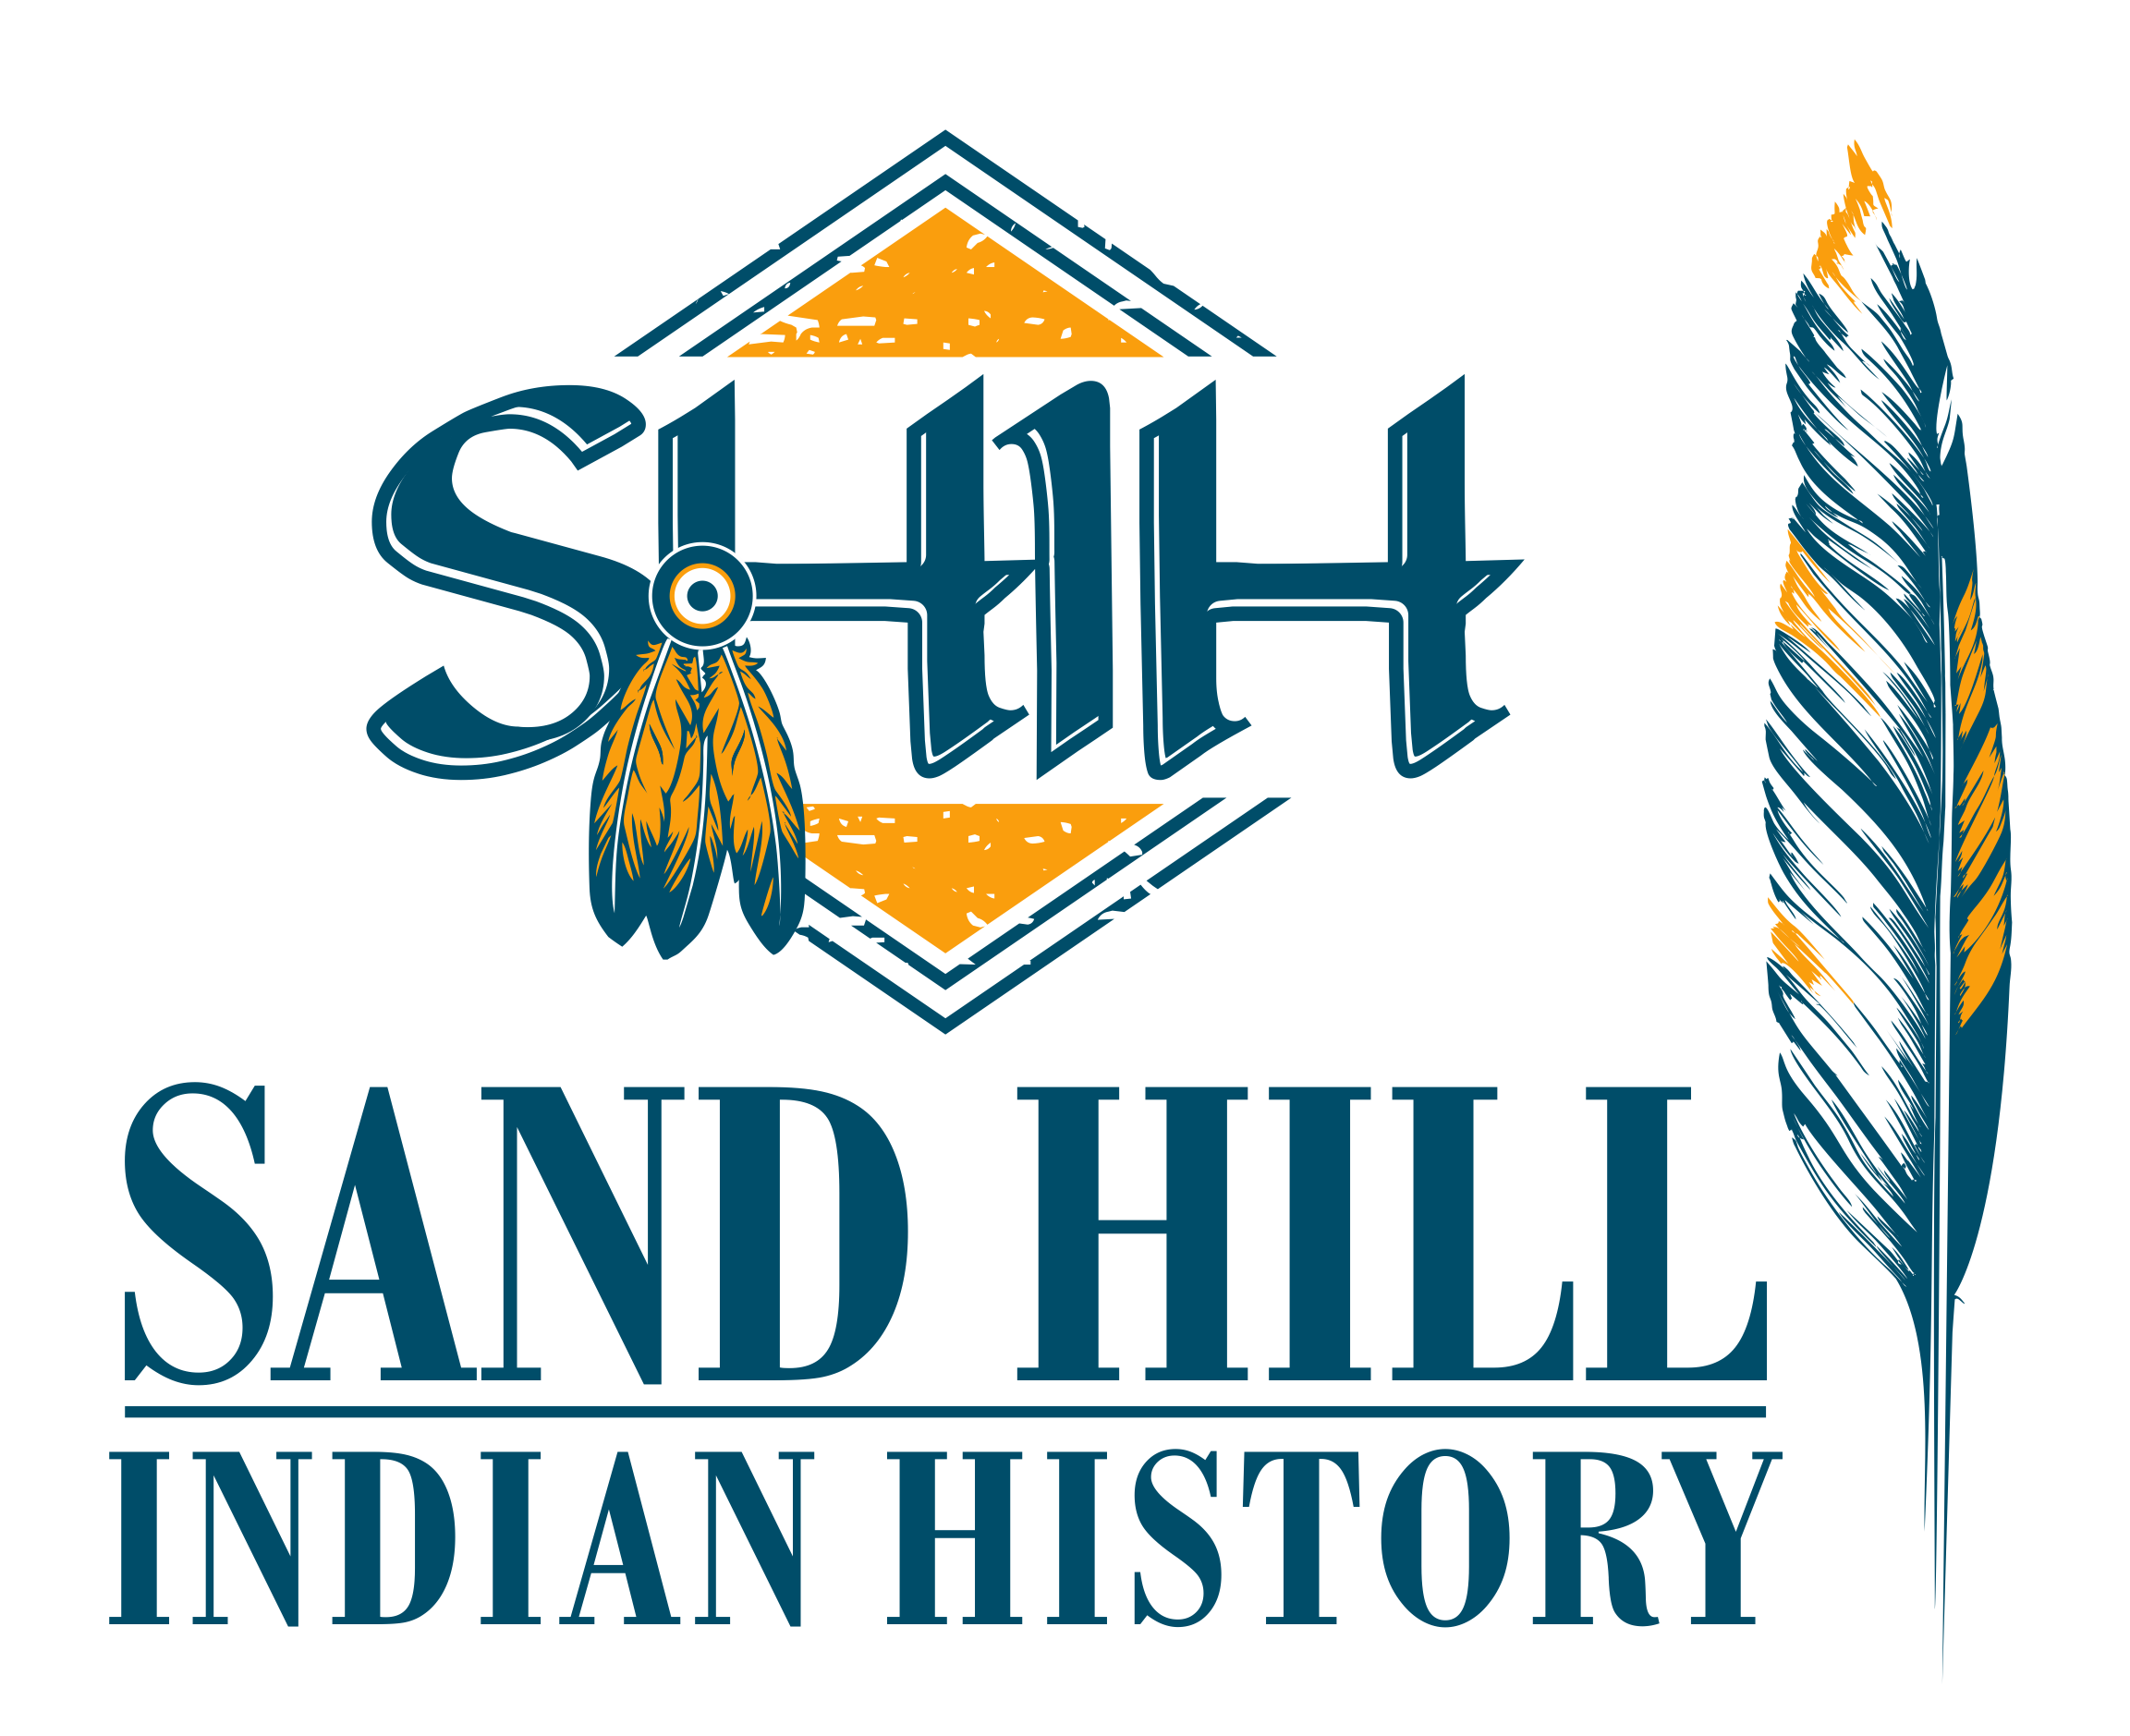 Sand Hill Indian History